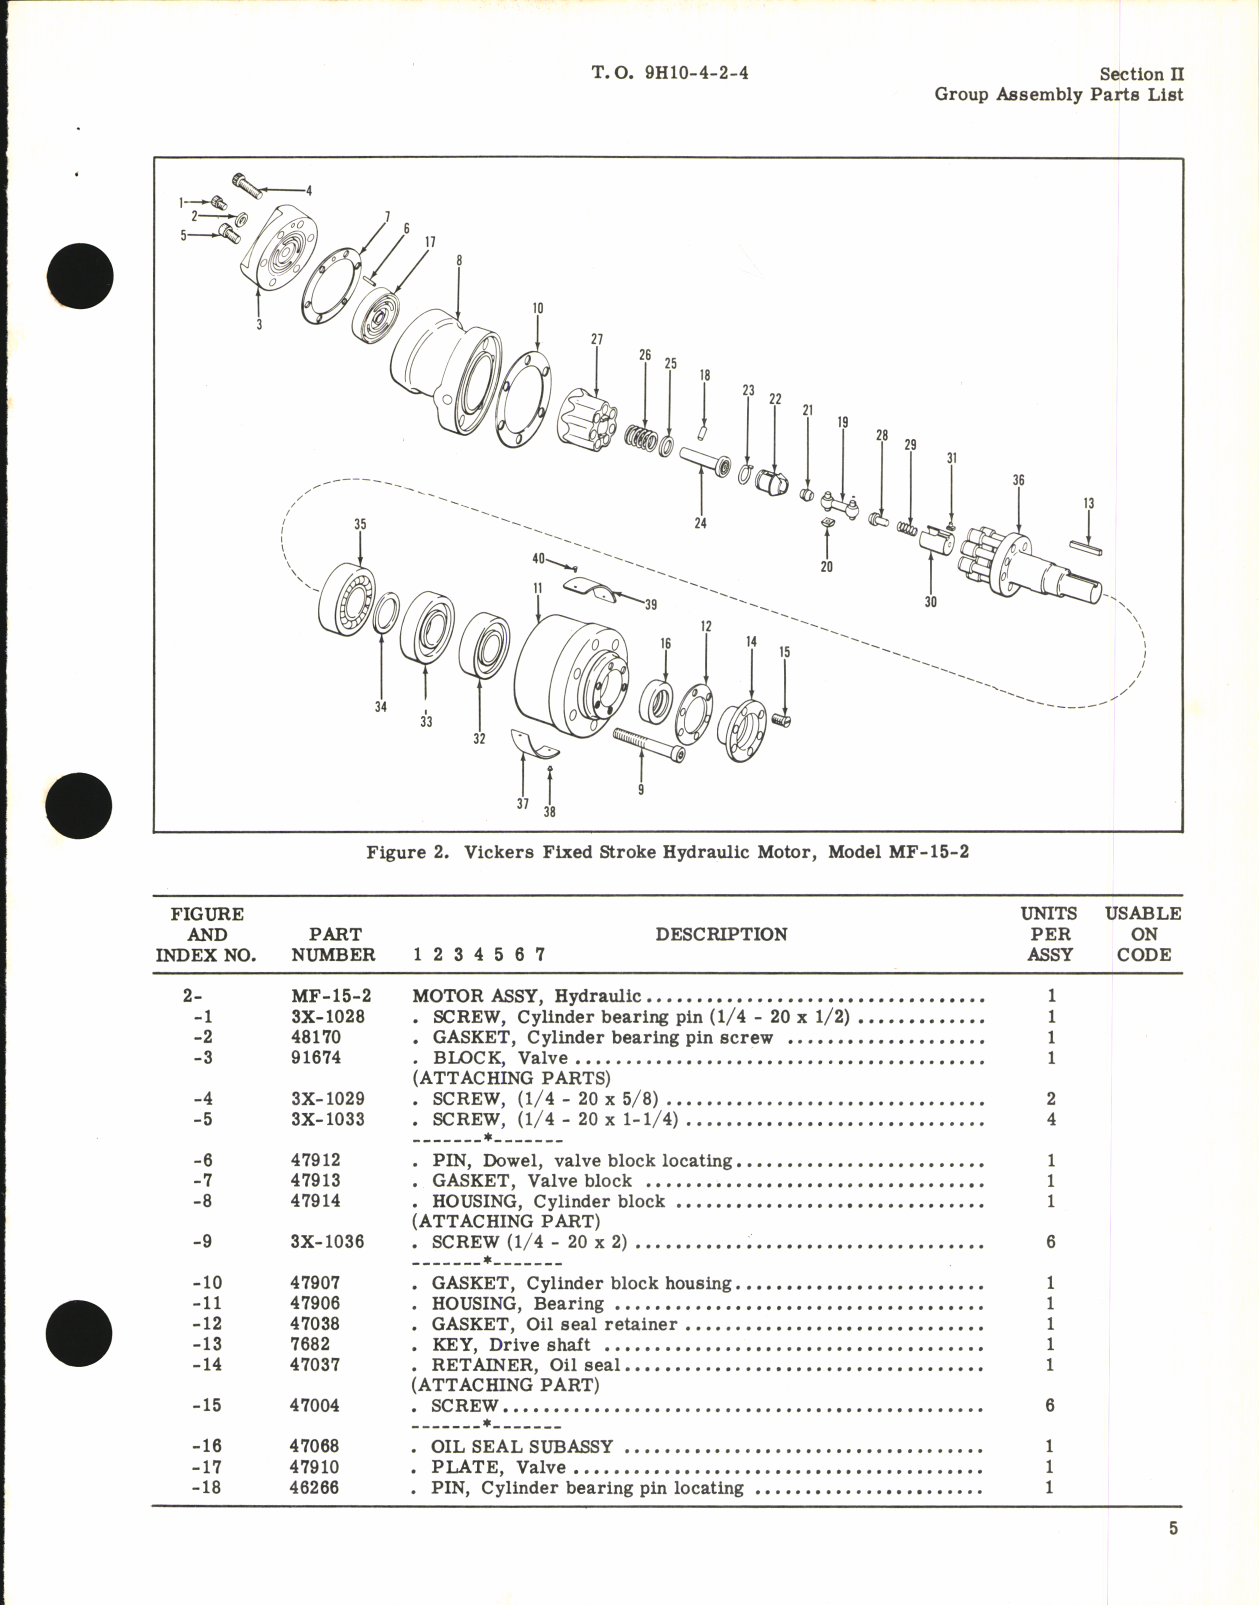 Sample page 7 from AirCorps Library document: Handbook of Illustrated Parts Breakdown for Hydraulic Motor Assembly 